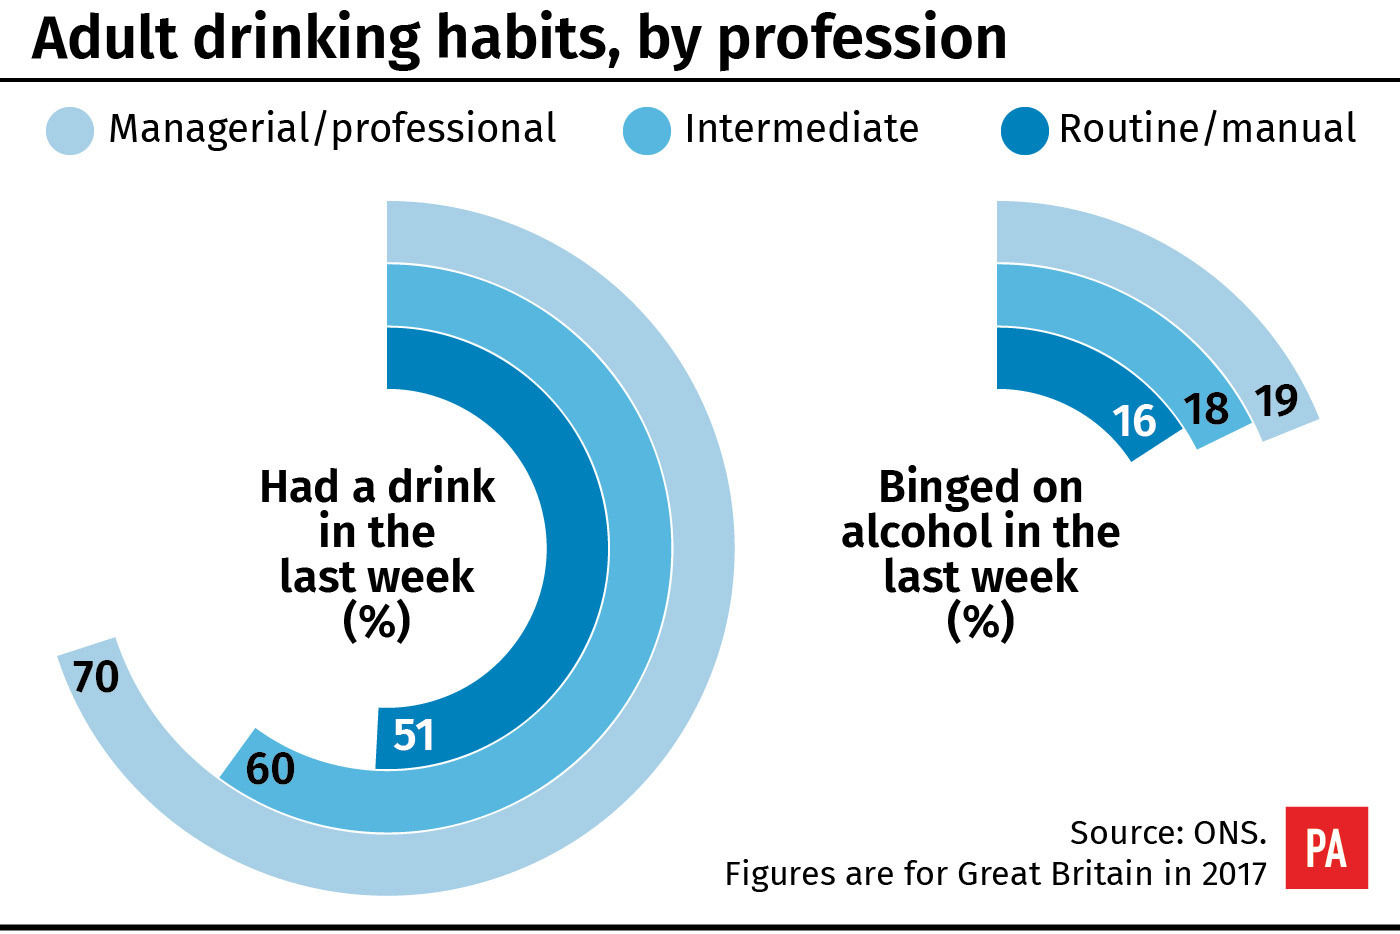 Adult drinking habits, by profession